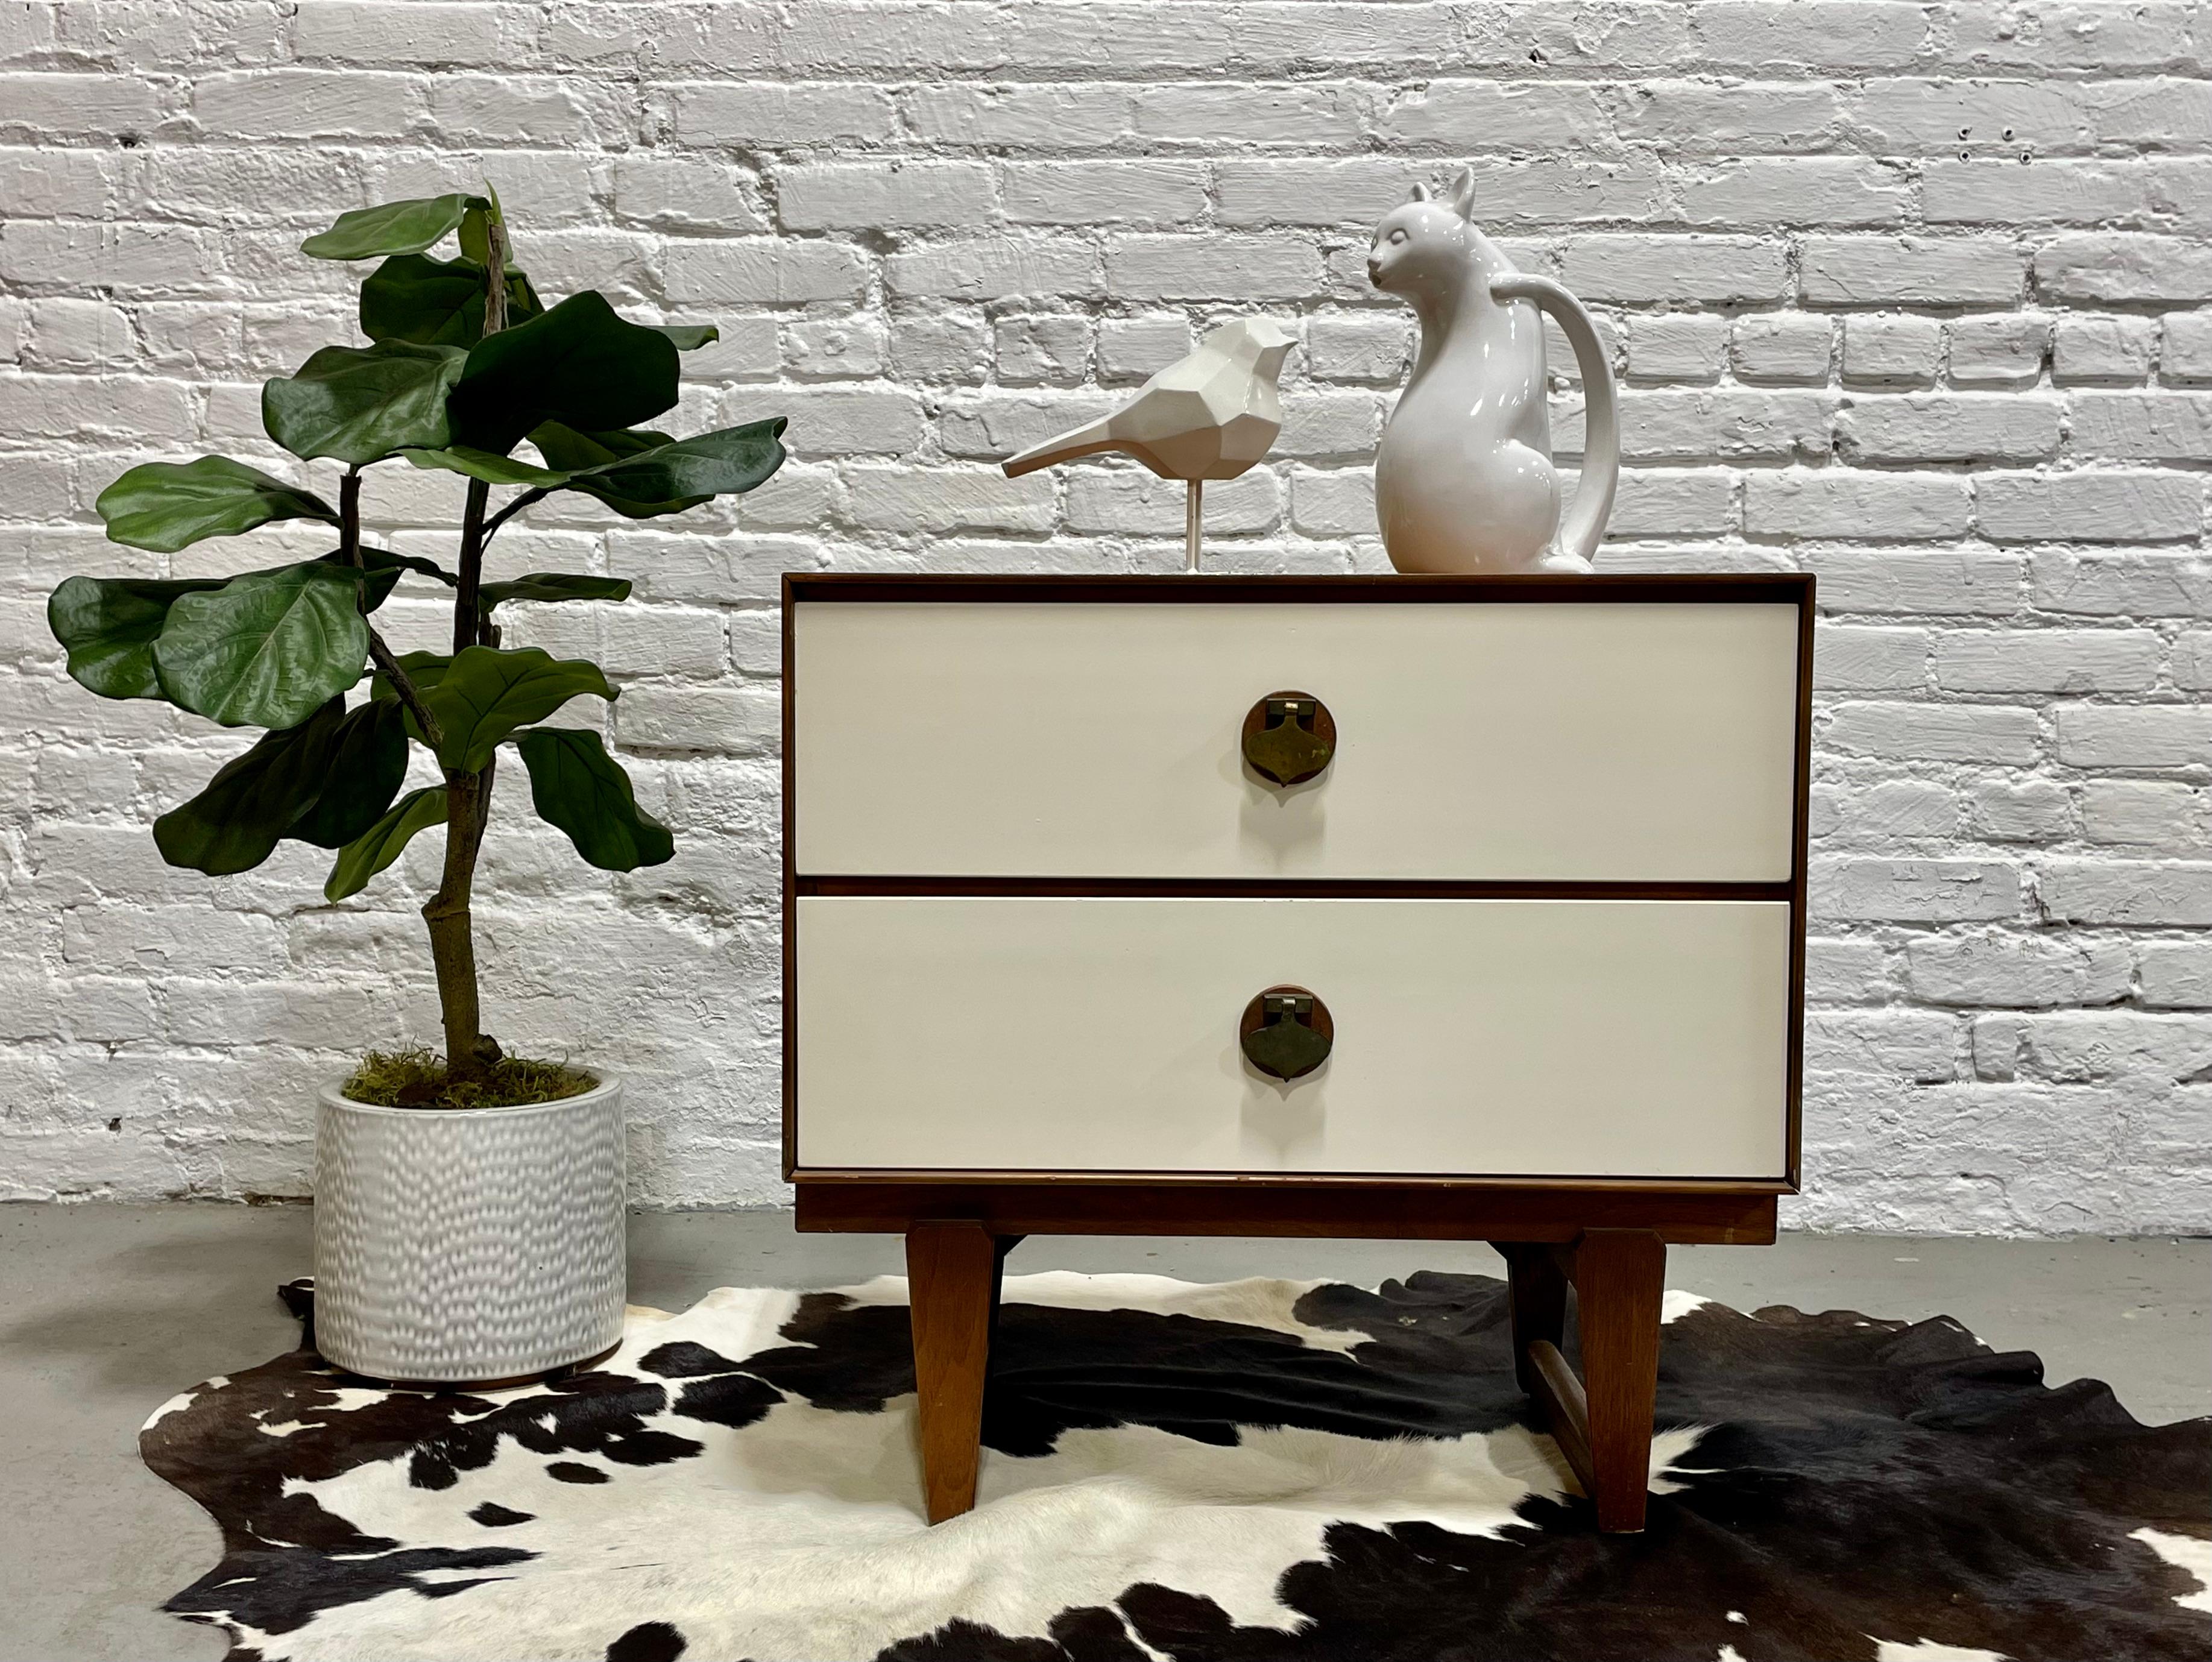 Rare + Original Mid Century Modern White & Walnut Nightstand by Stanley Furniture Co., c. 1960's. This elusive series was in limited production and is incredibly hard to find. The nightstand is highlighted by solid brass spade pulls over solid